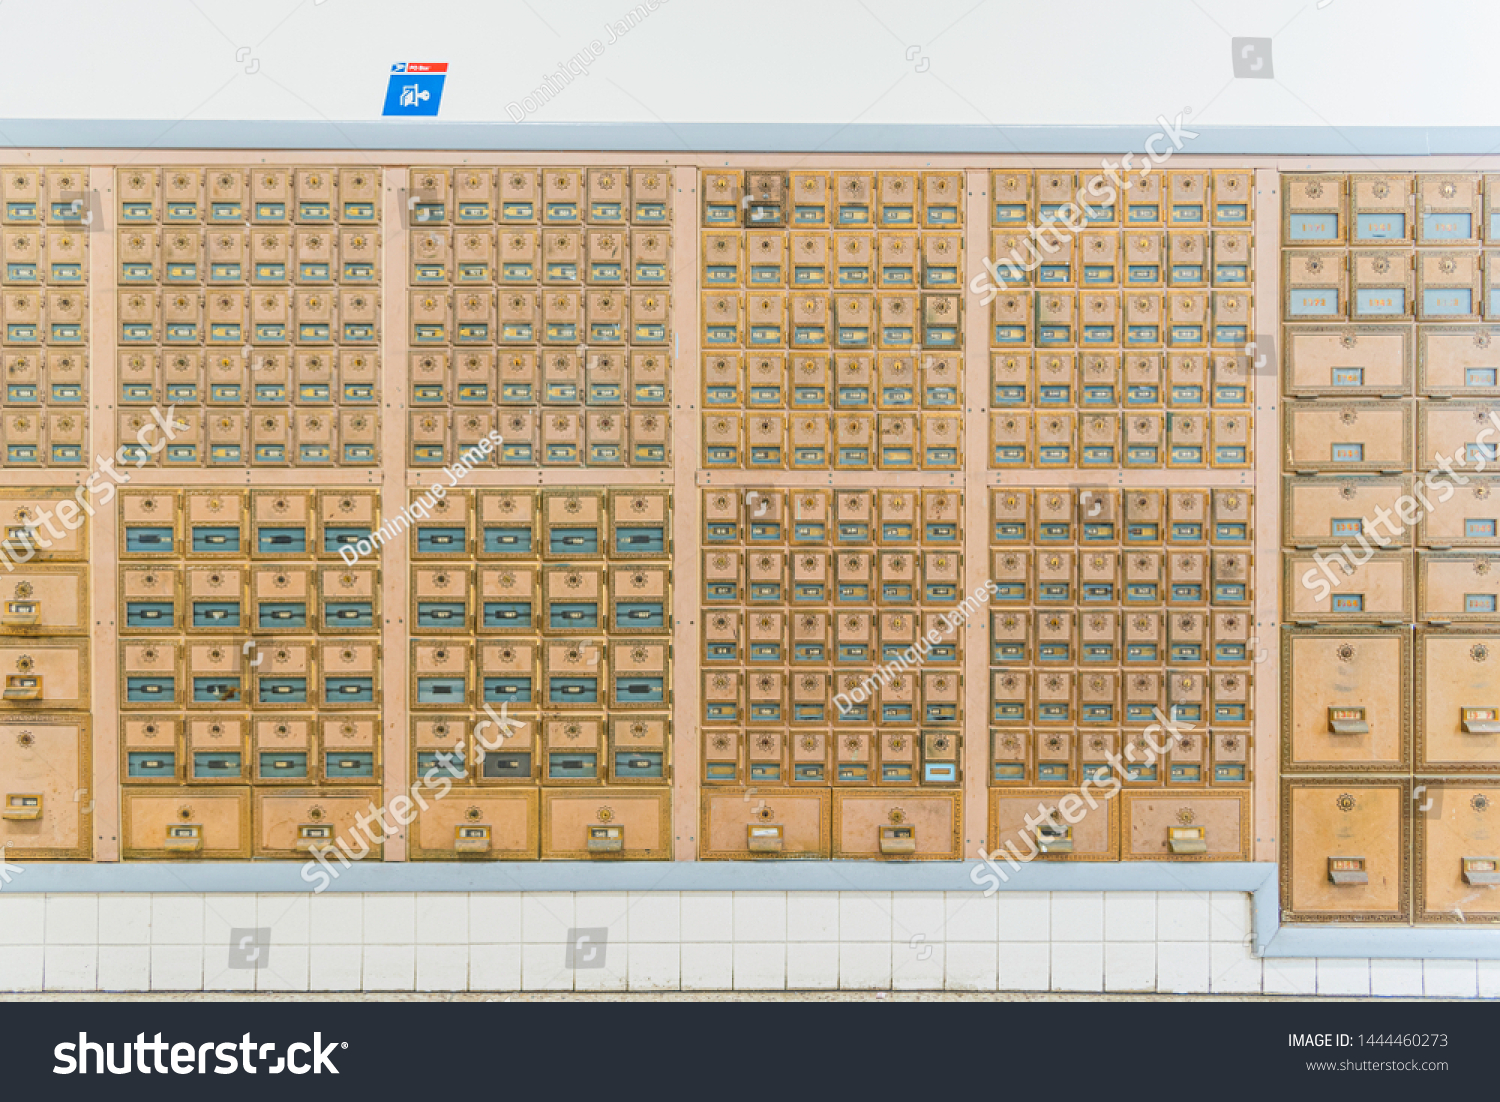 Rows Midcentury Modern Design Post Office Stock Image Download Now